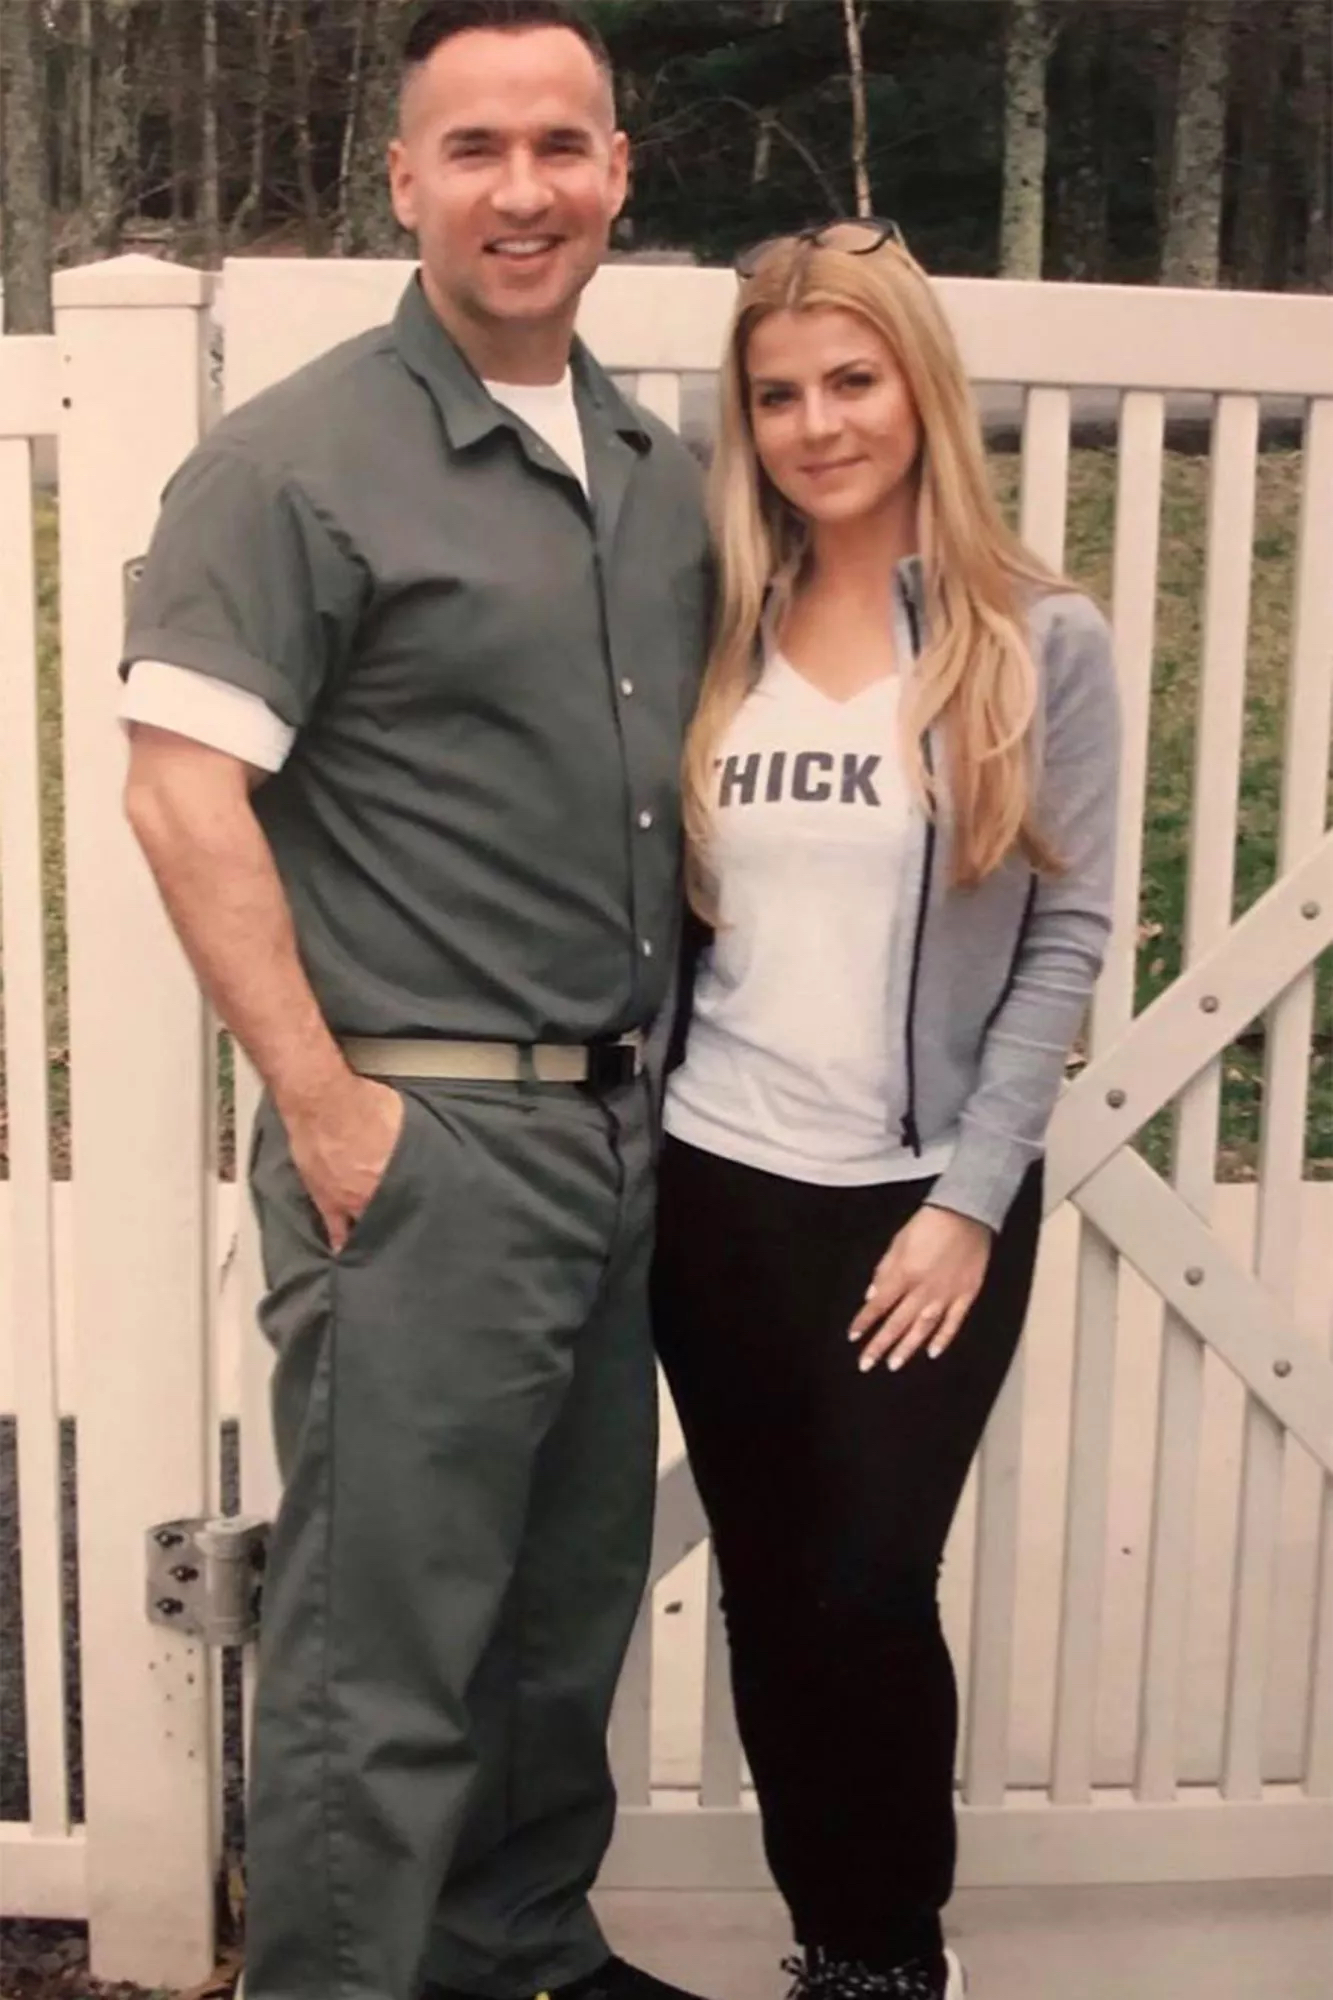 Mike married Lauren Sorrentino just before heading to prison